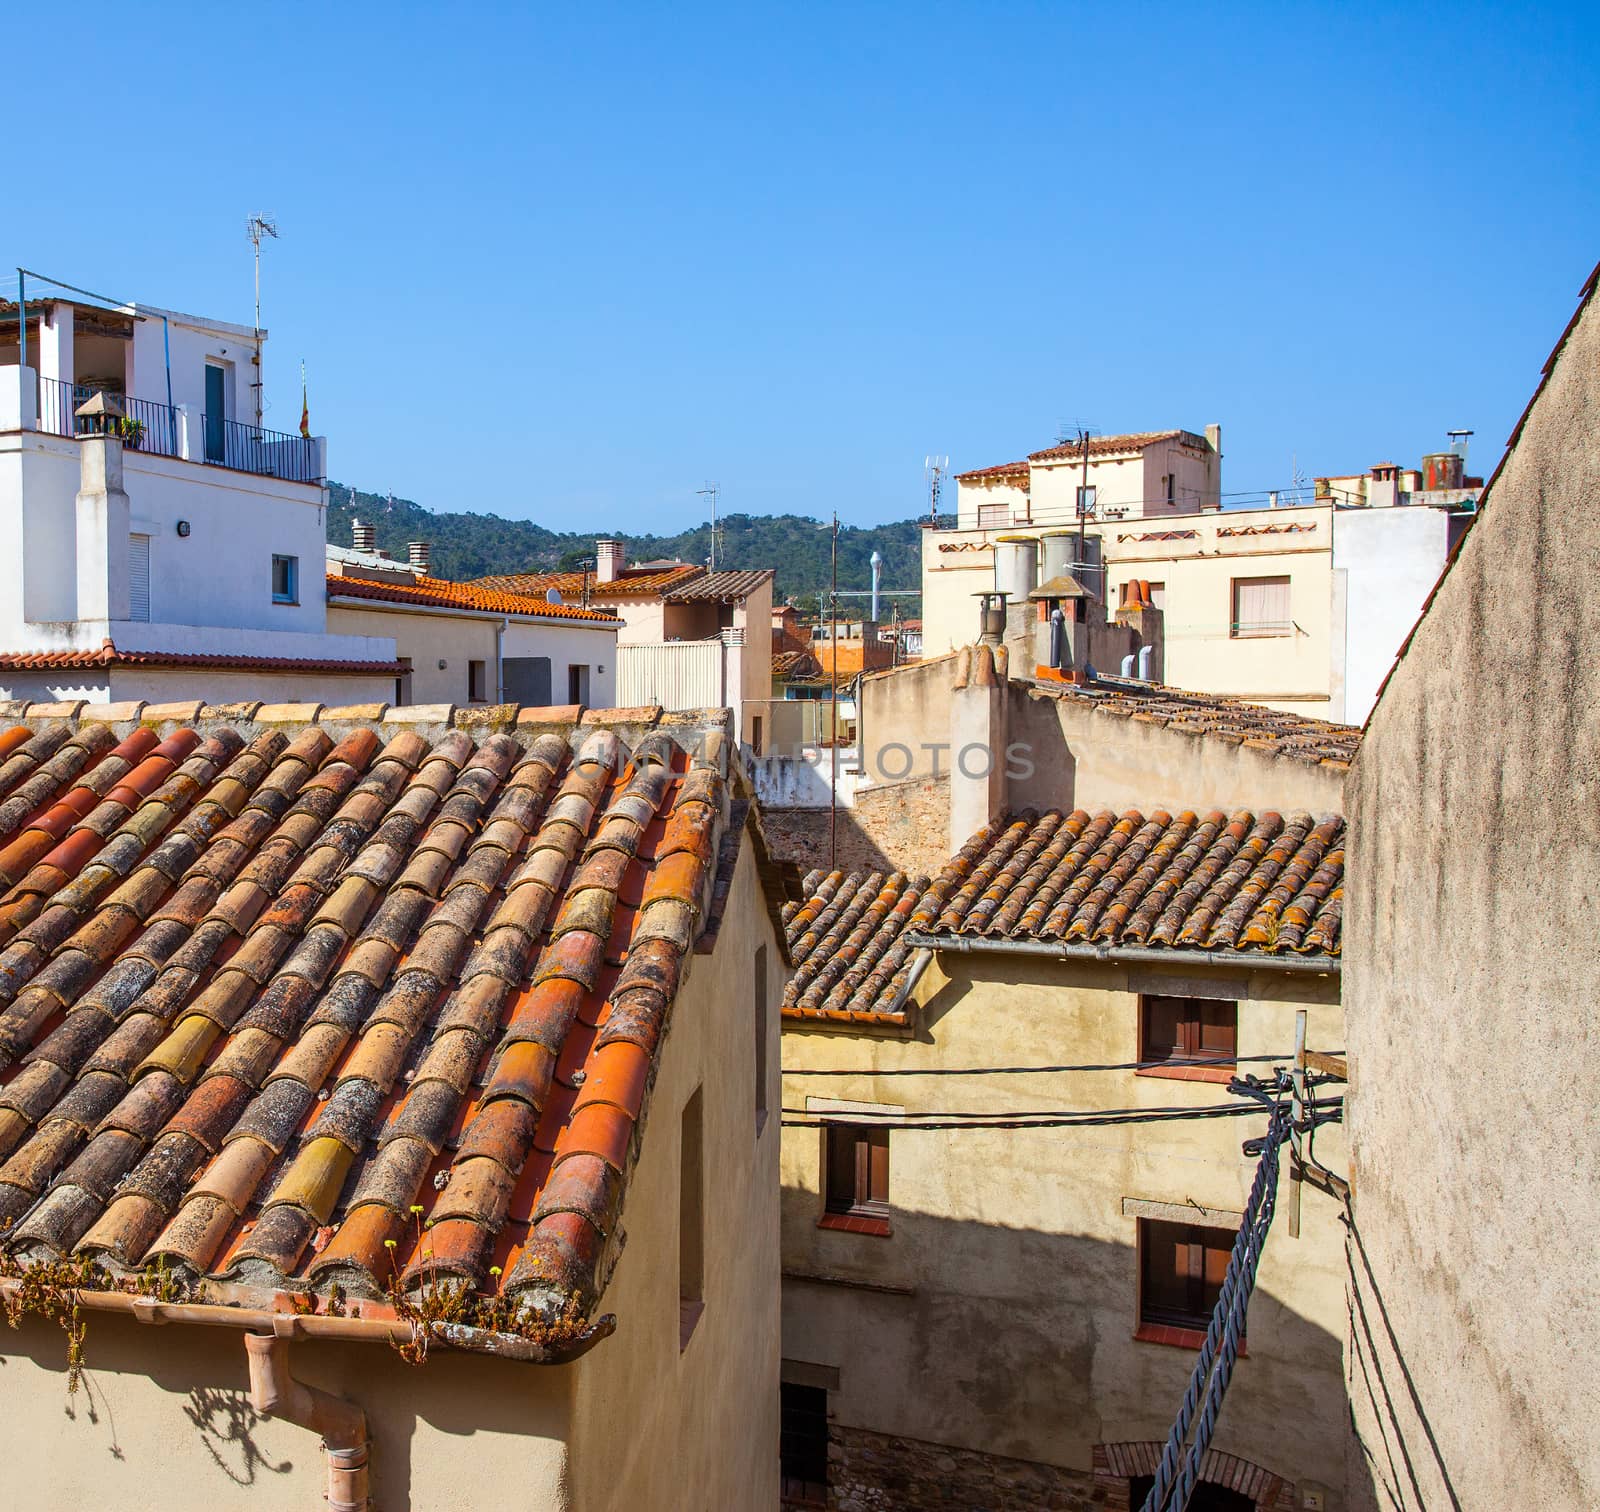 Tossa de Mar, Catalonia, Spain, 06.17.2013, roofs of houses in the old town on the Mediterranean coast